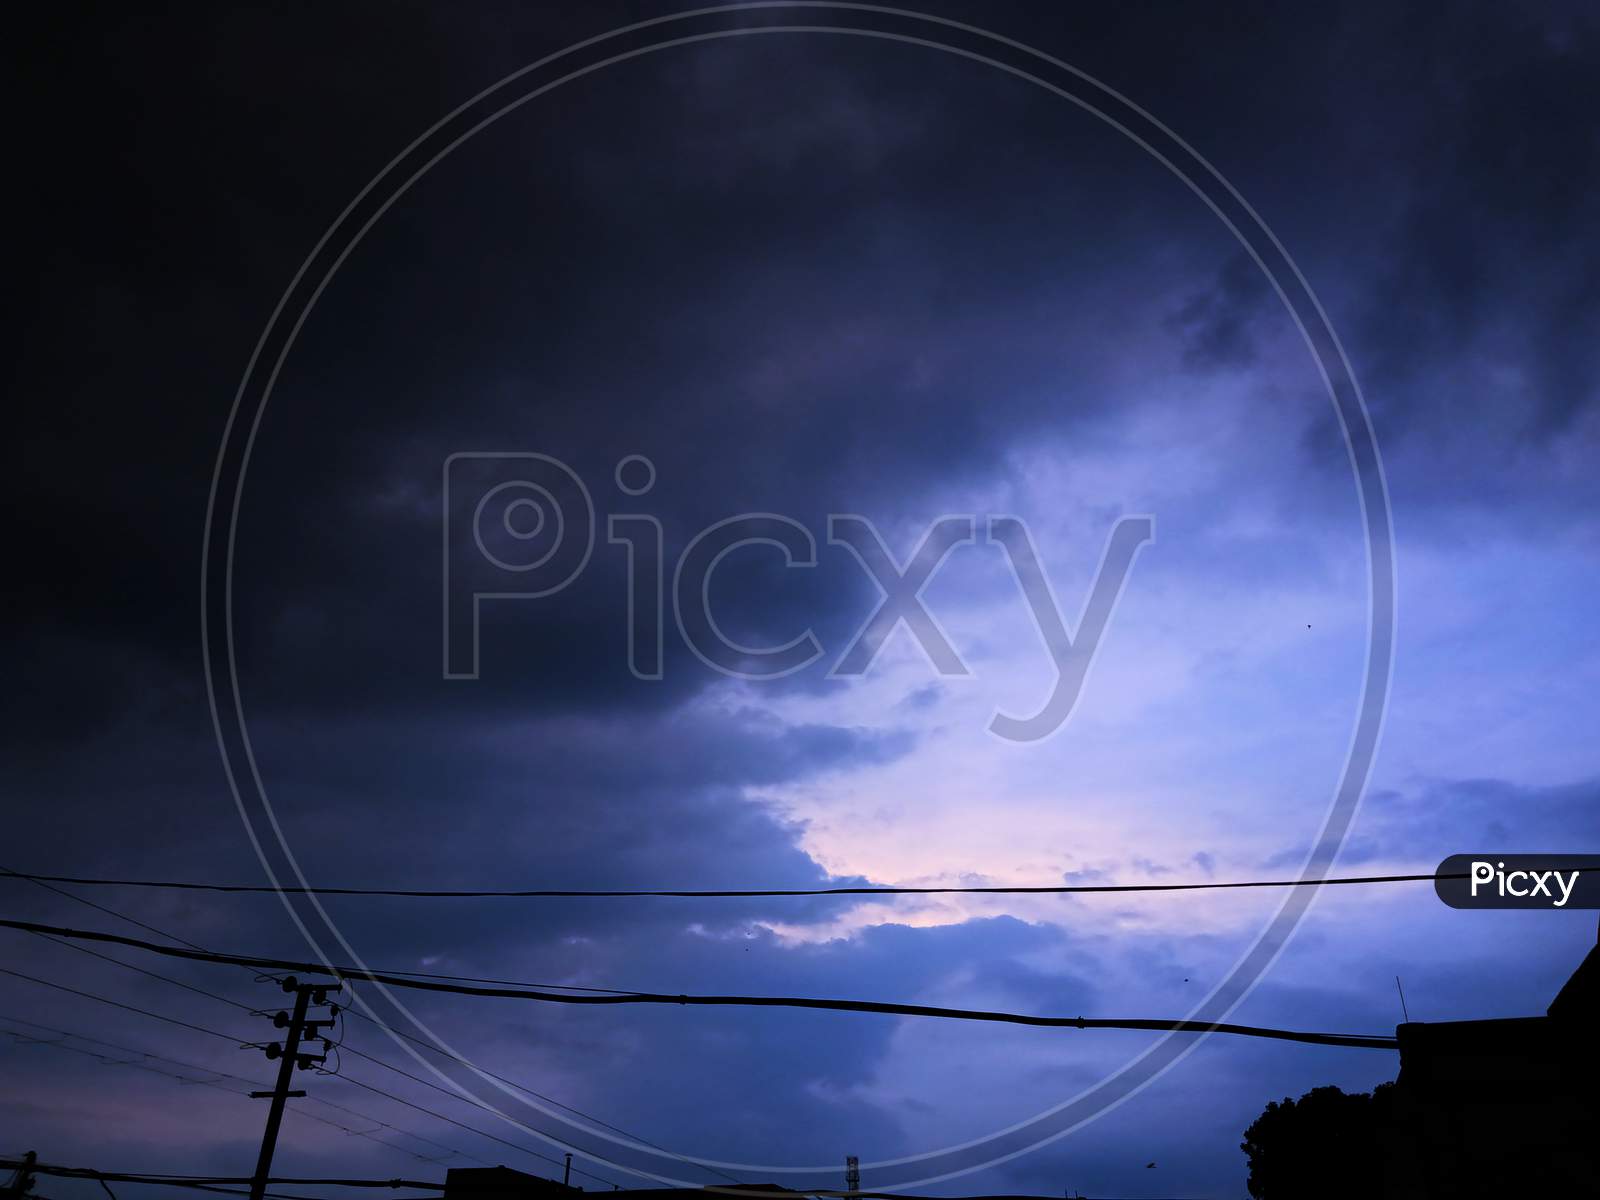 Beautiful sky background with overhead power line